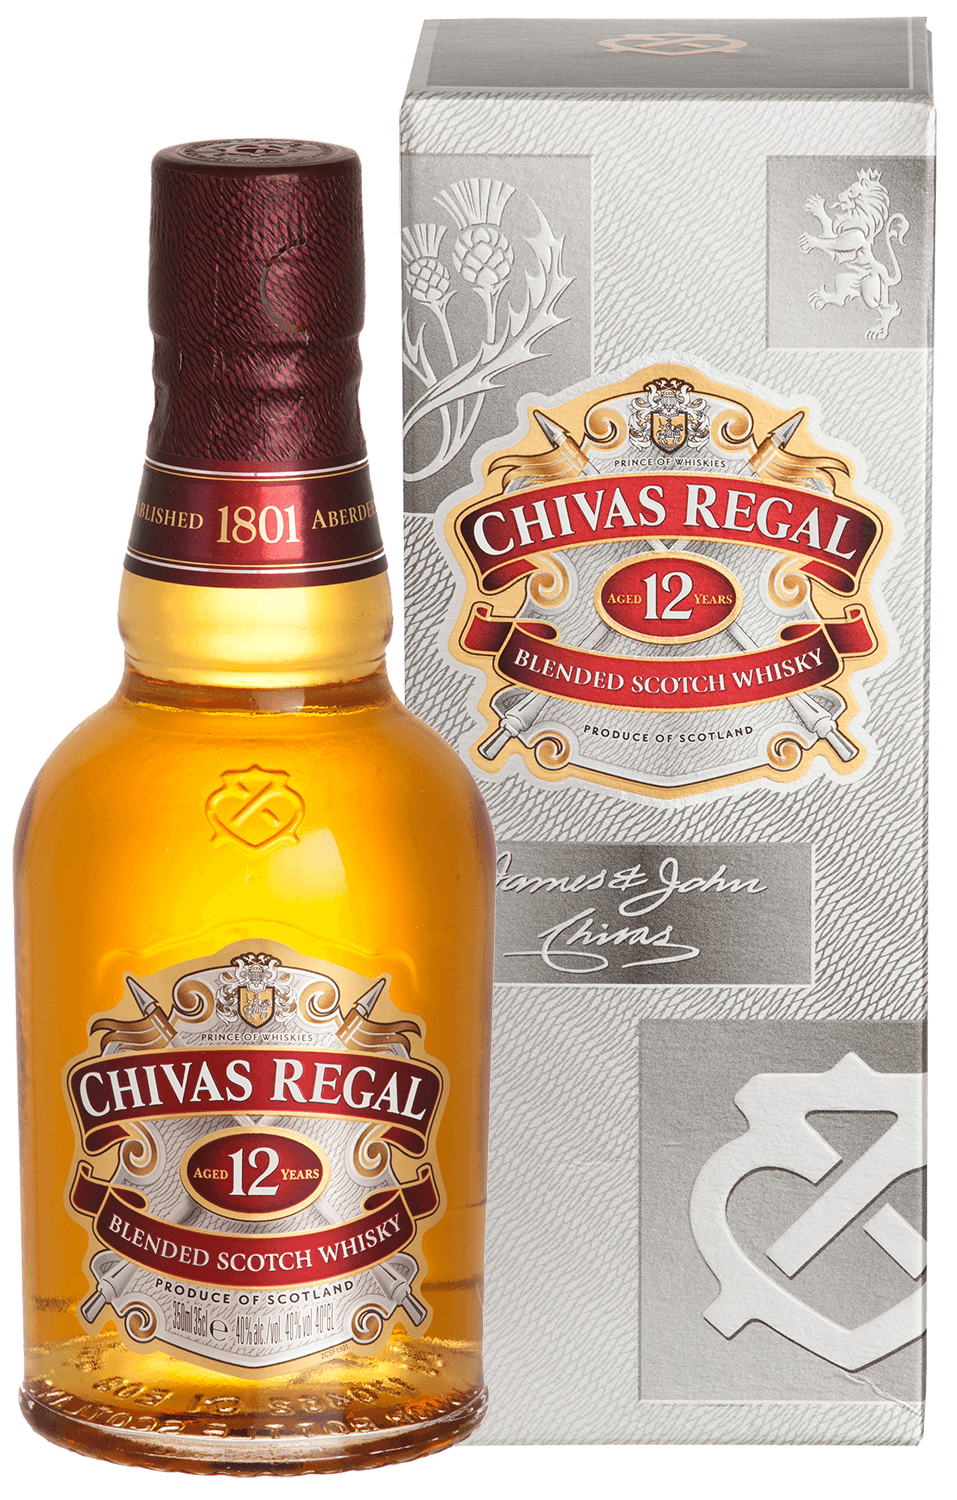 Chivas Regal 12 y.o. blended scotch whisky (gift box) chivas regal blended scotch whisky 25 y o gift box